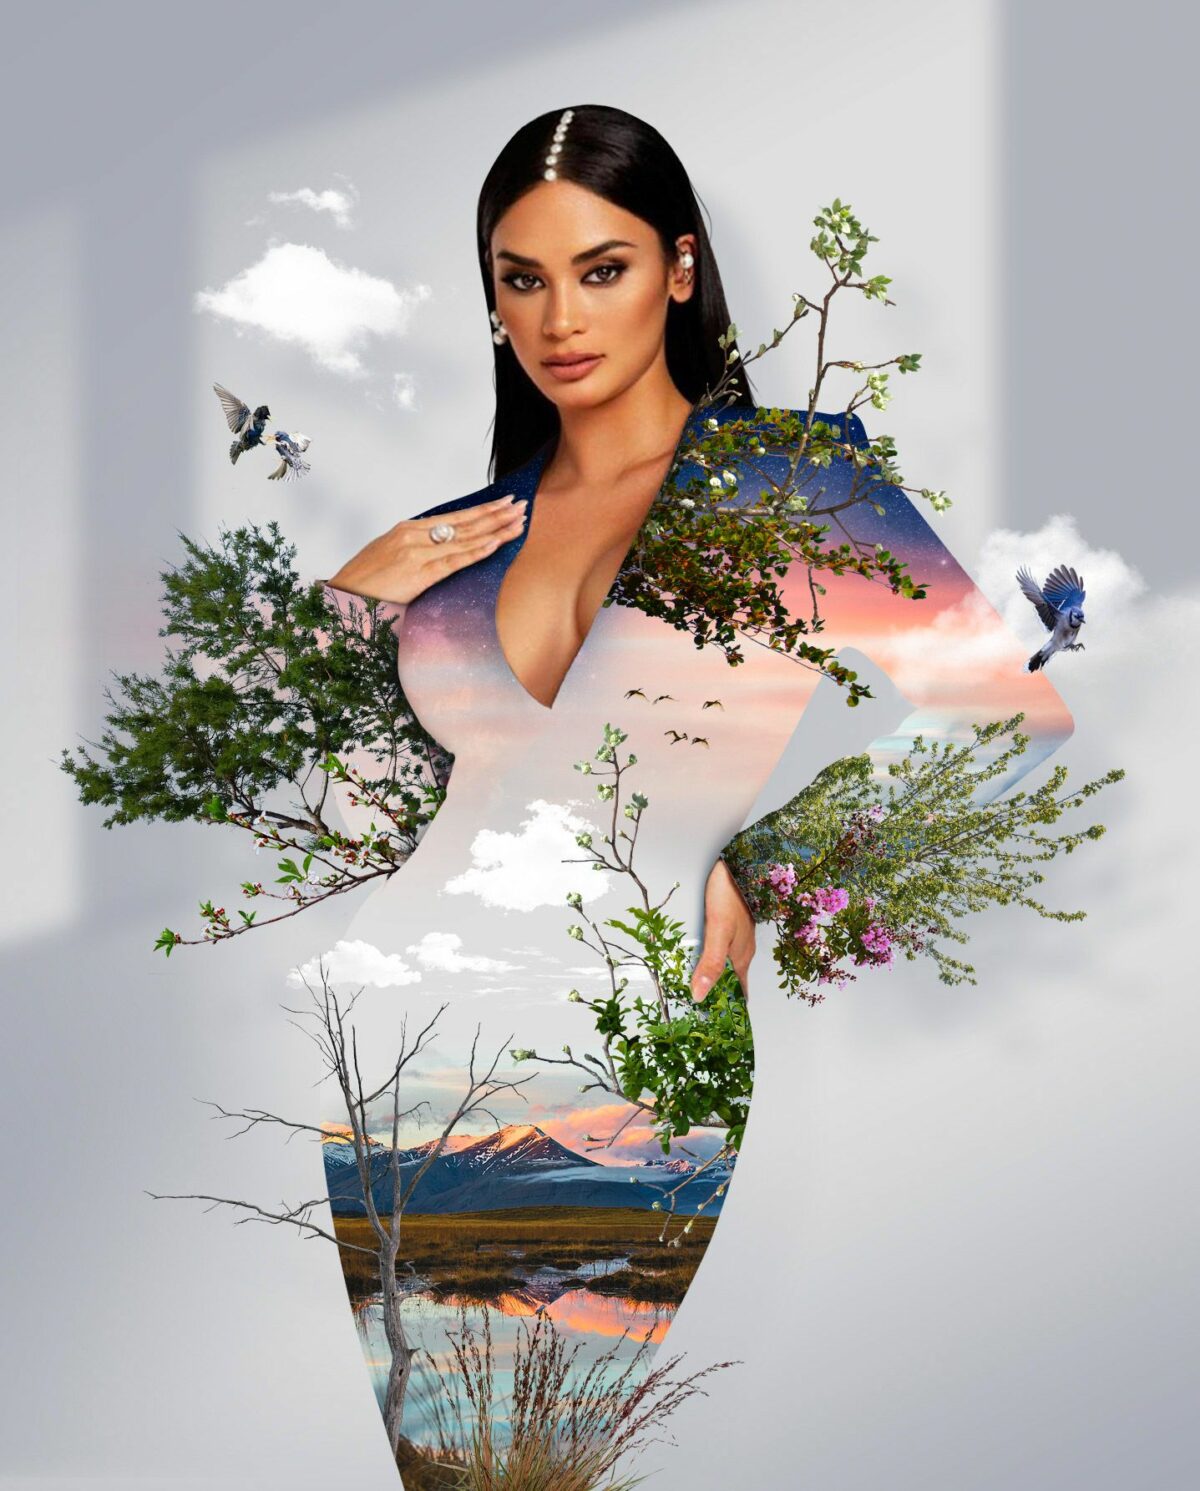 Girls And Nature Incredible Digital Collages By Charles Bentley 18